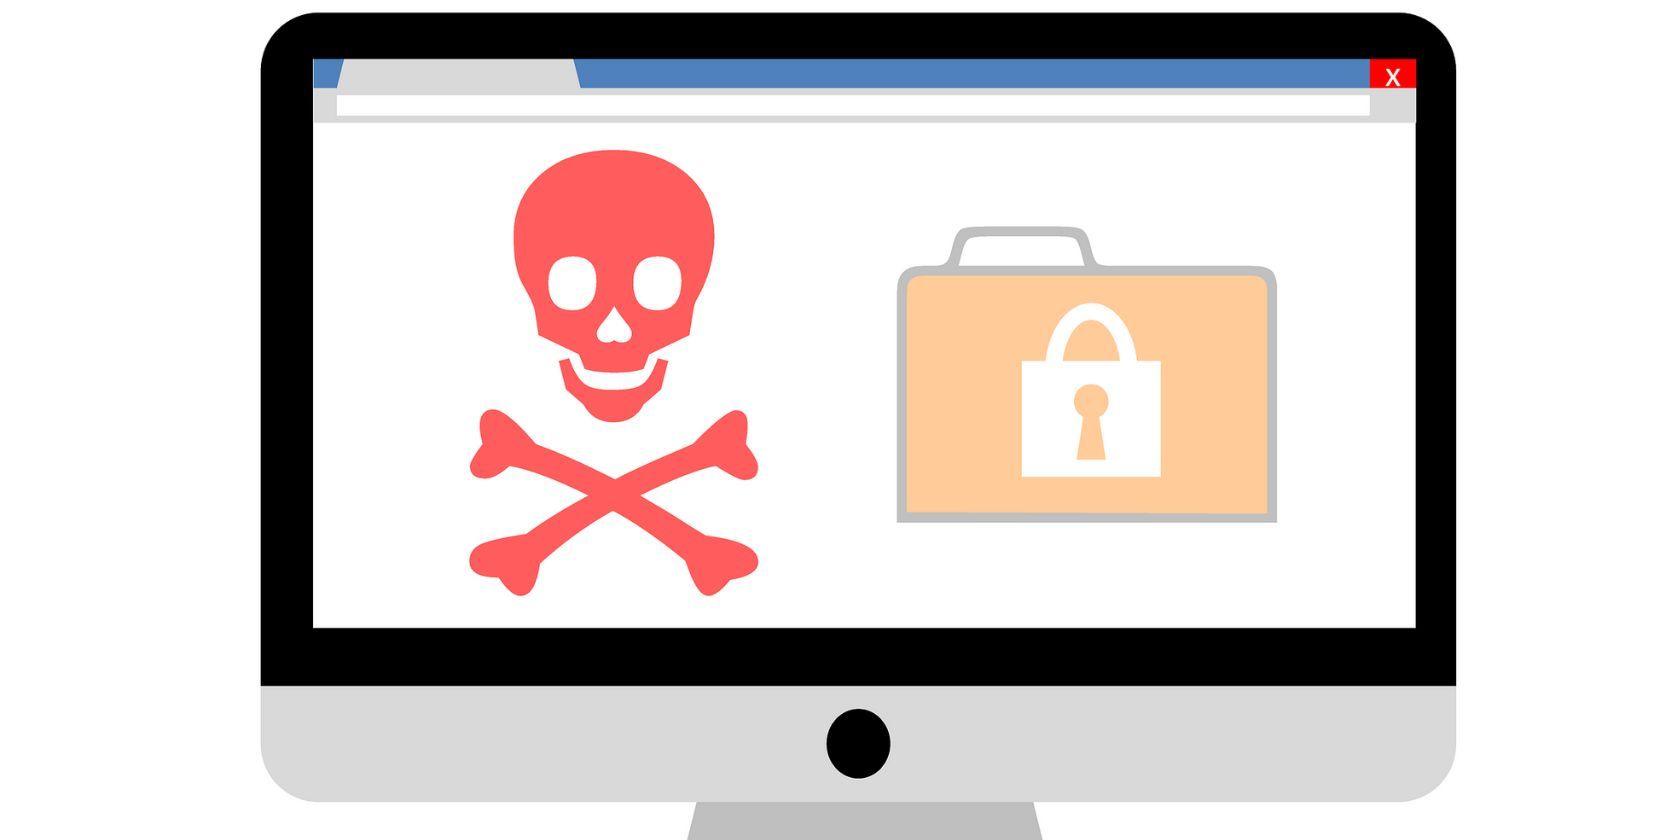 red skull and bones icon and locked file icon on computer screen